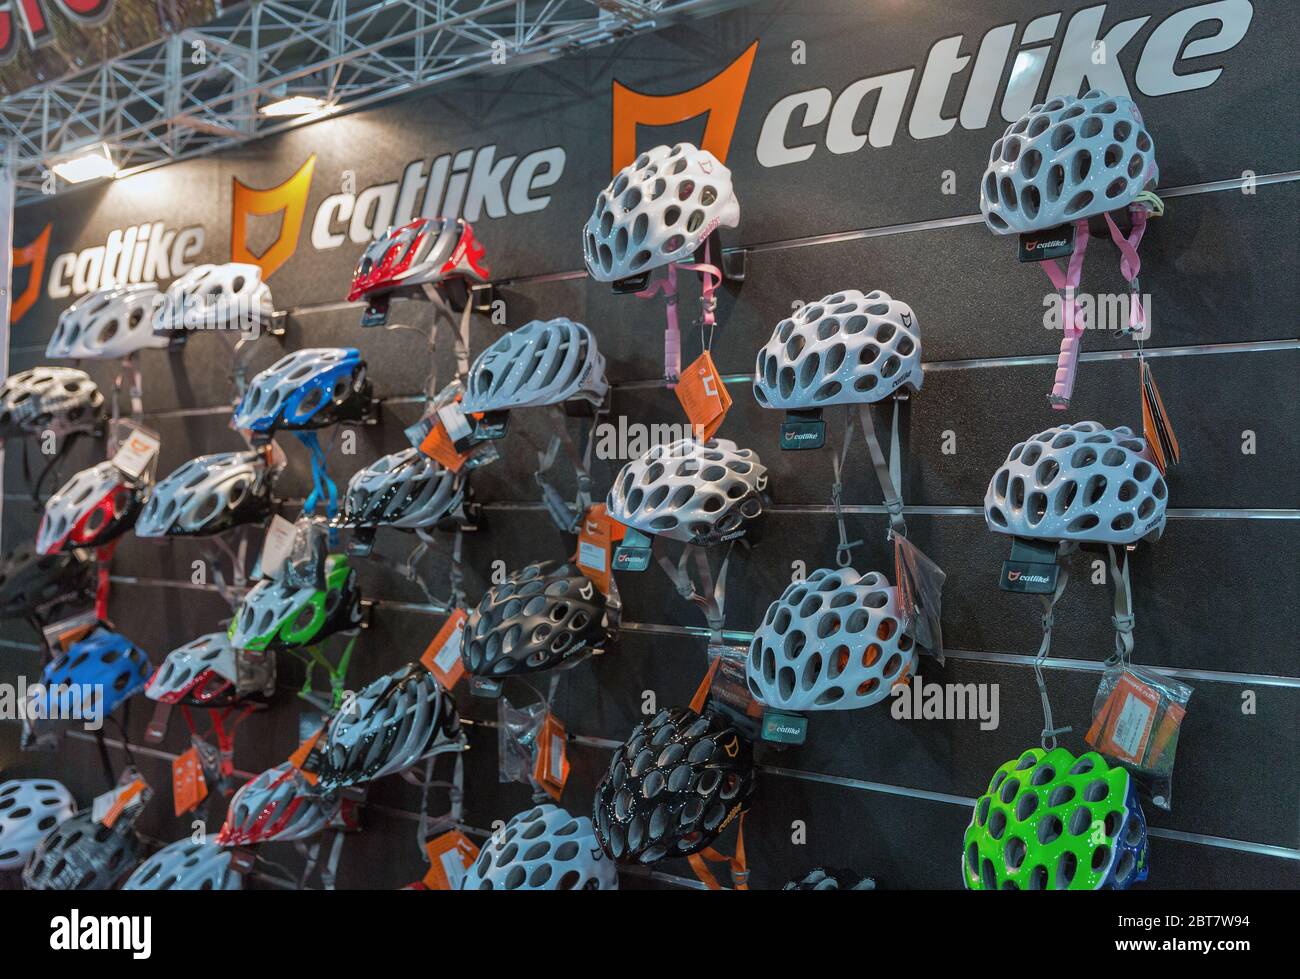 KIEV, UKRAINE - FEBRUARY 26, 2016: Catlike bicycle helmets Spanish manufacturer booth during International Bicycle Exhibition VELOBIKE 2016 in KyivExp Stock Photo